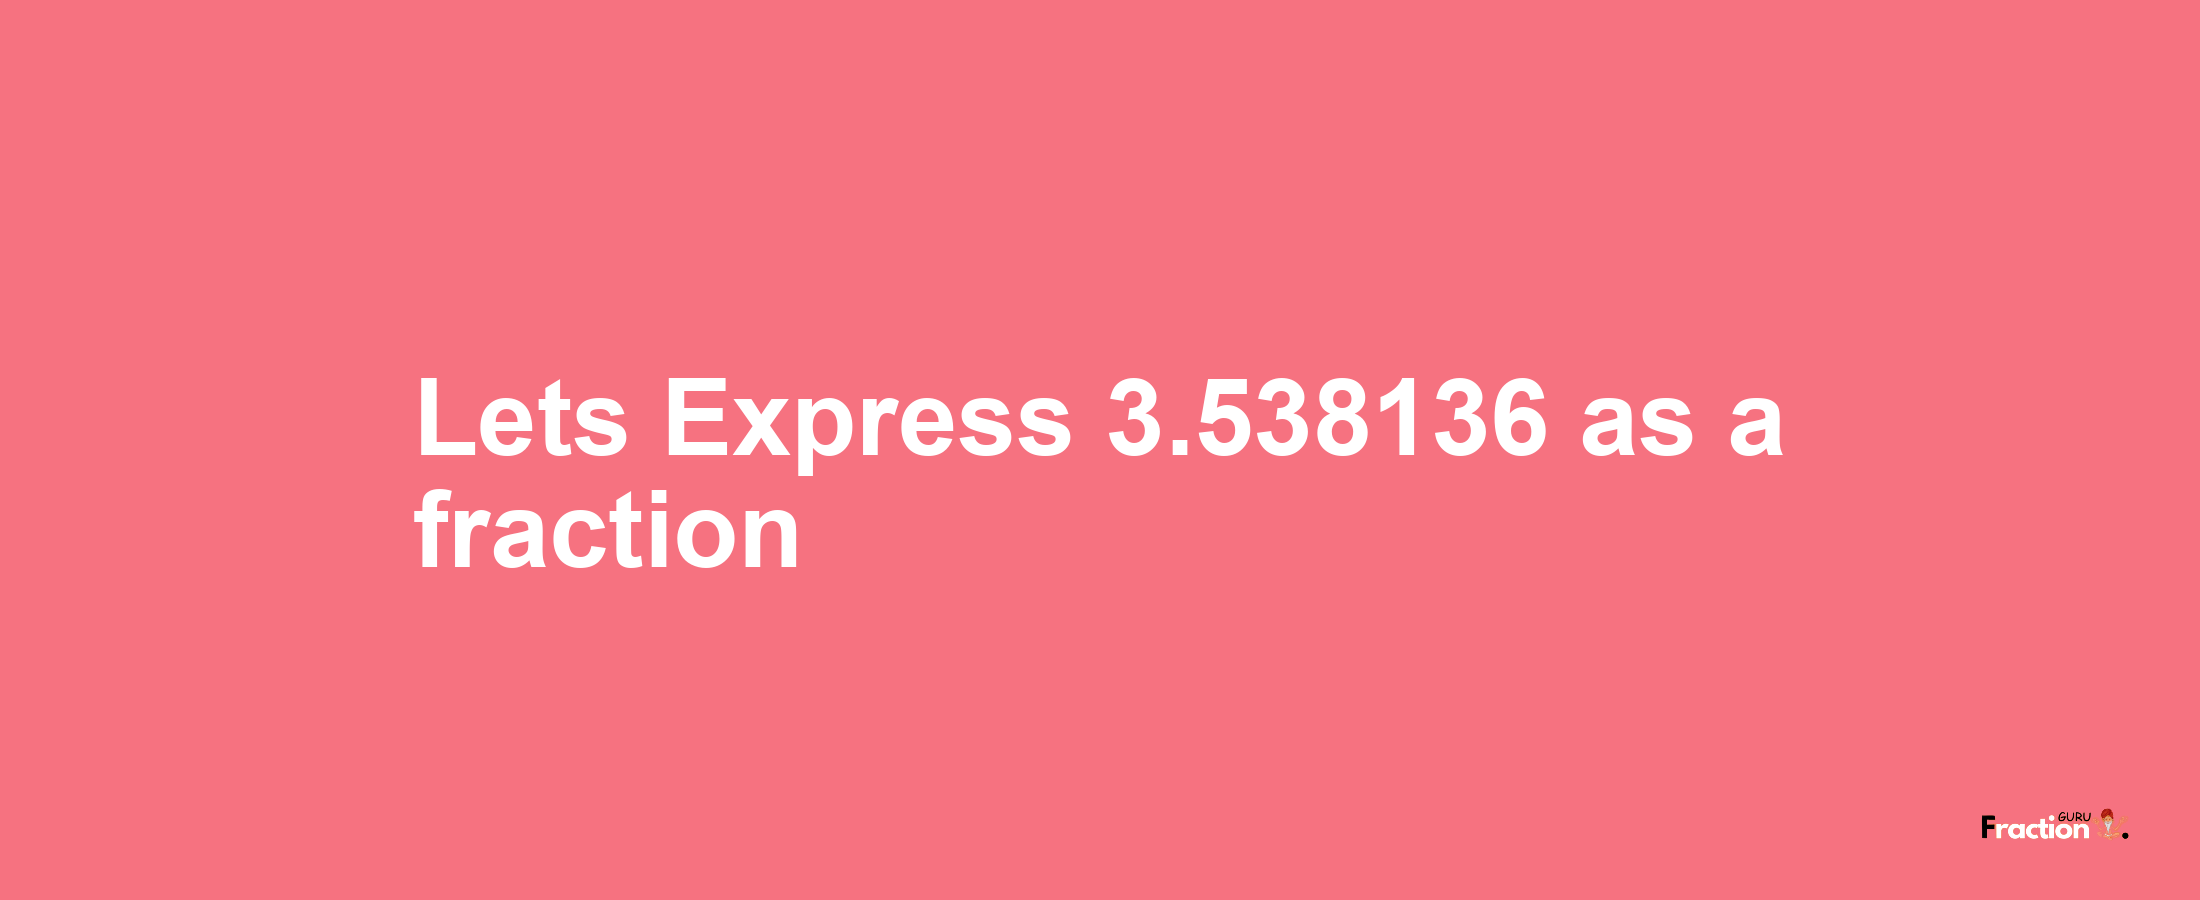 Lets Express 3.538136 as afraction